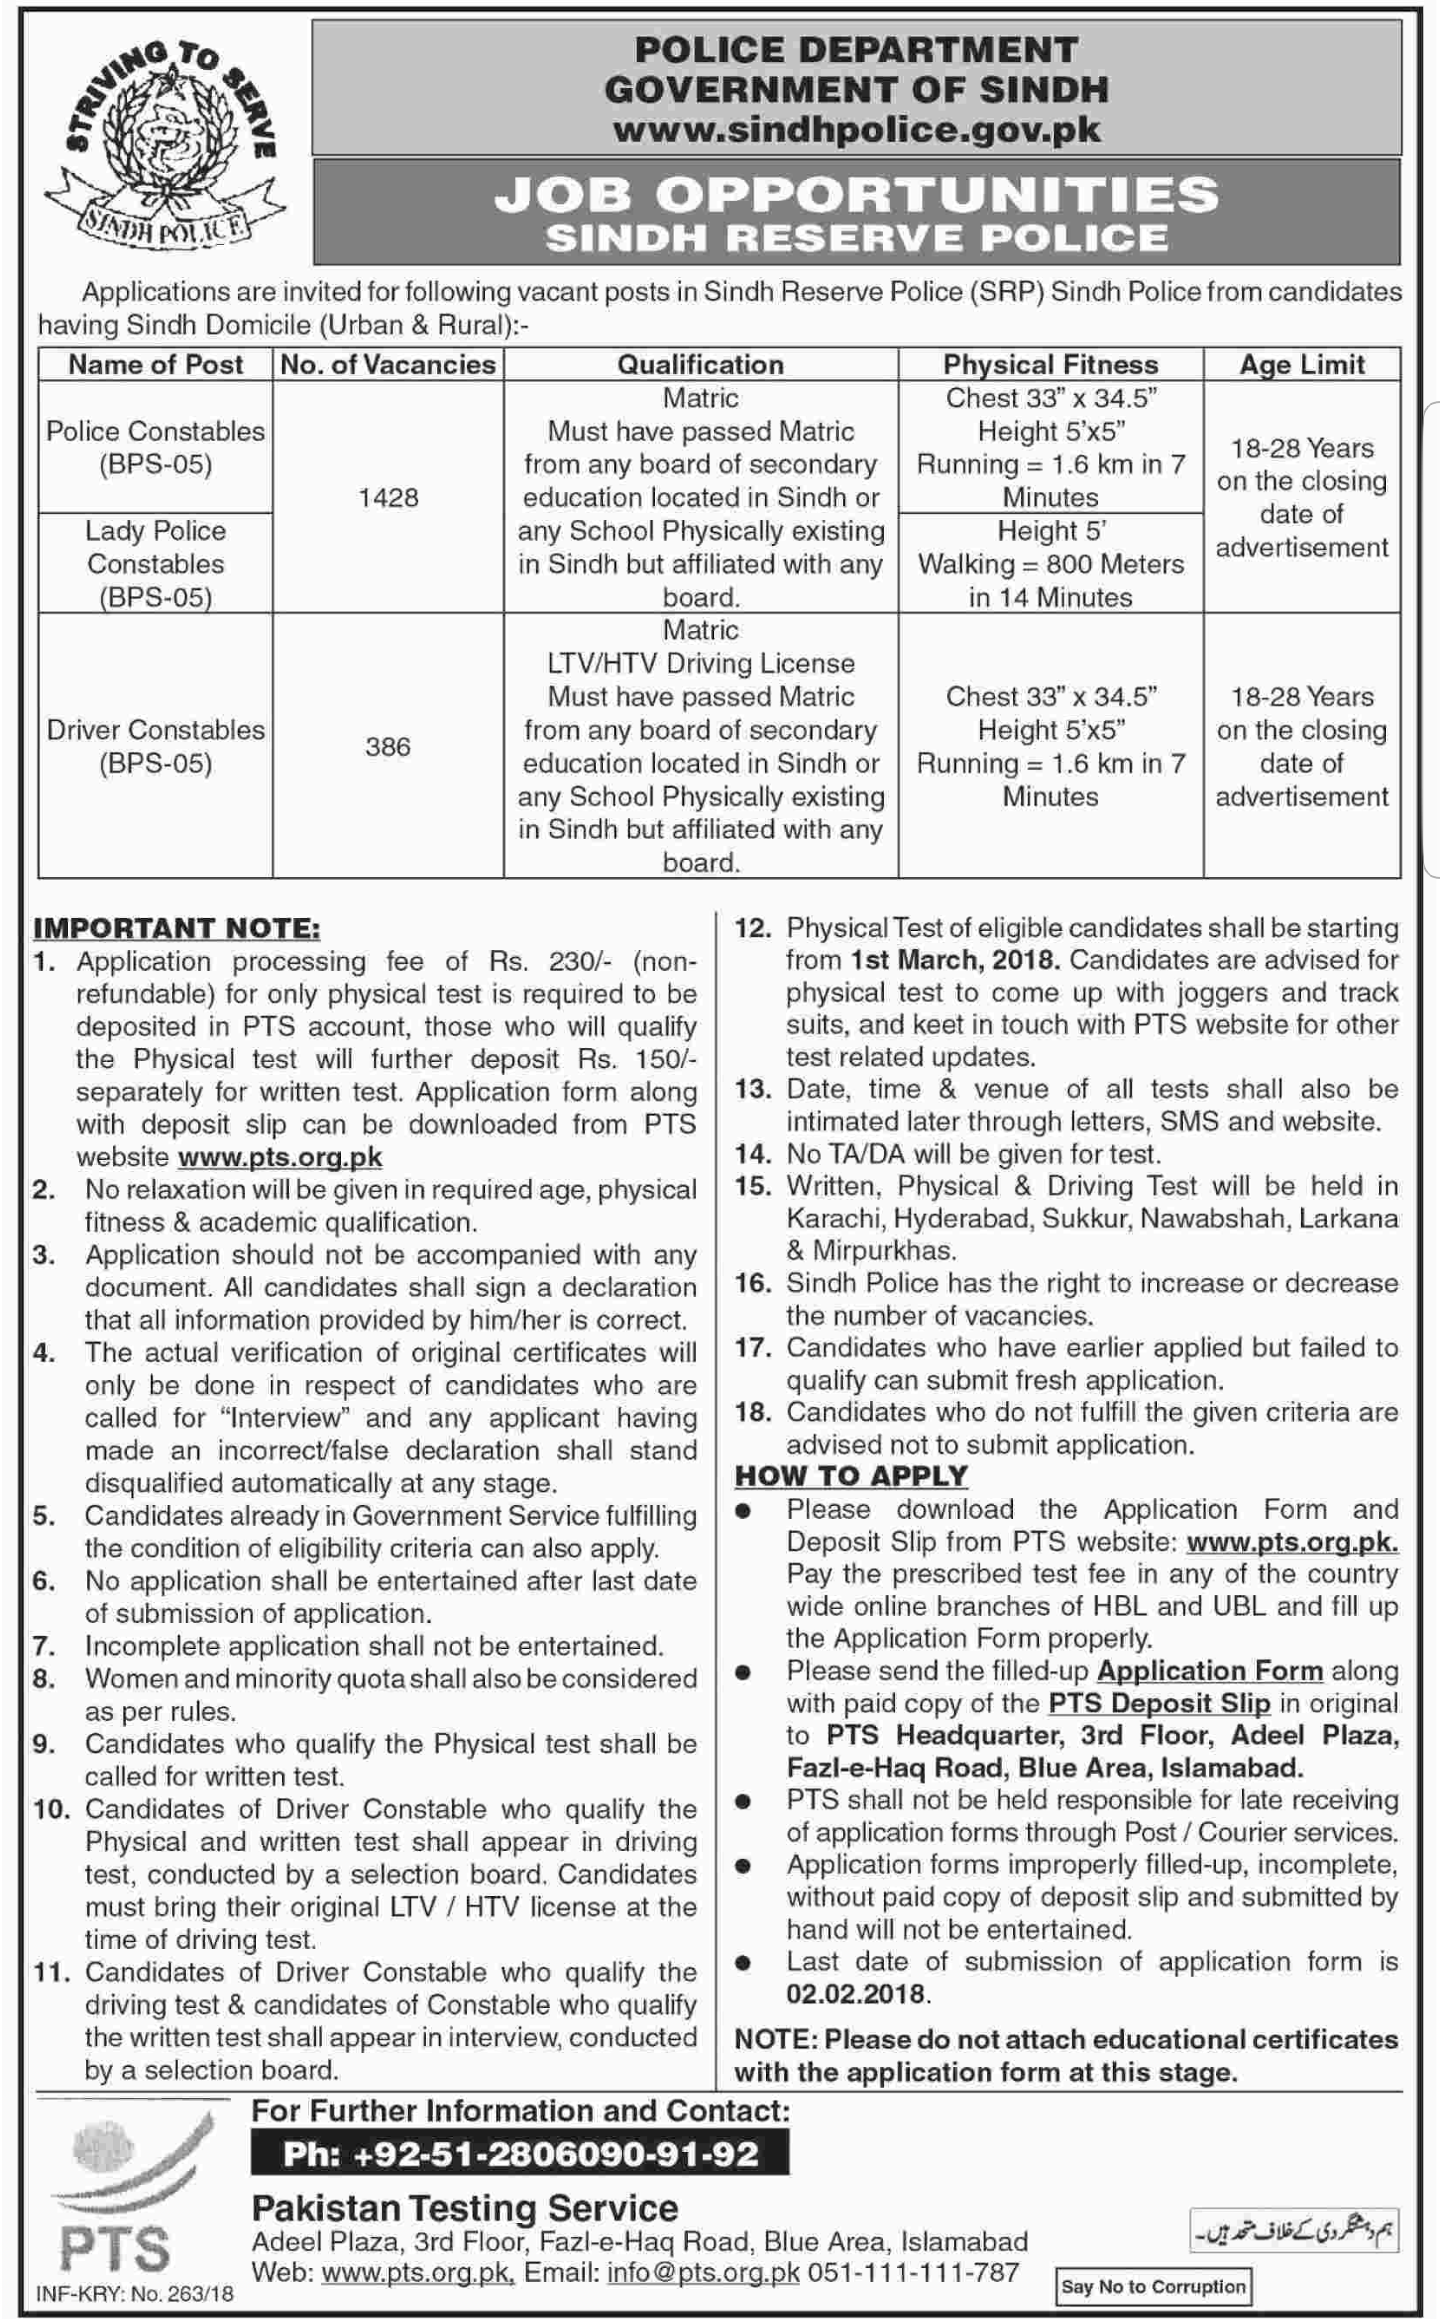 PTS Police Jobs Sindh 2018 Postponed ,new dates will be announced soon